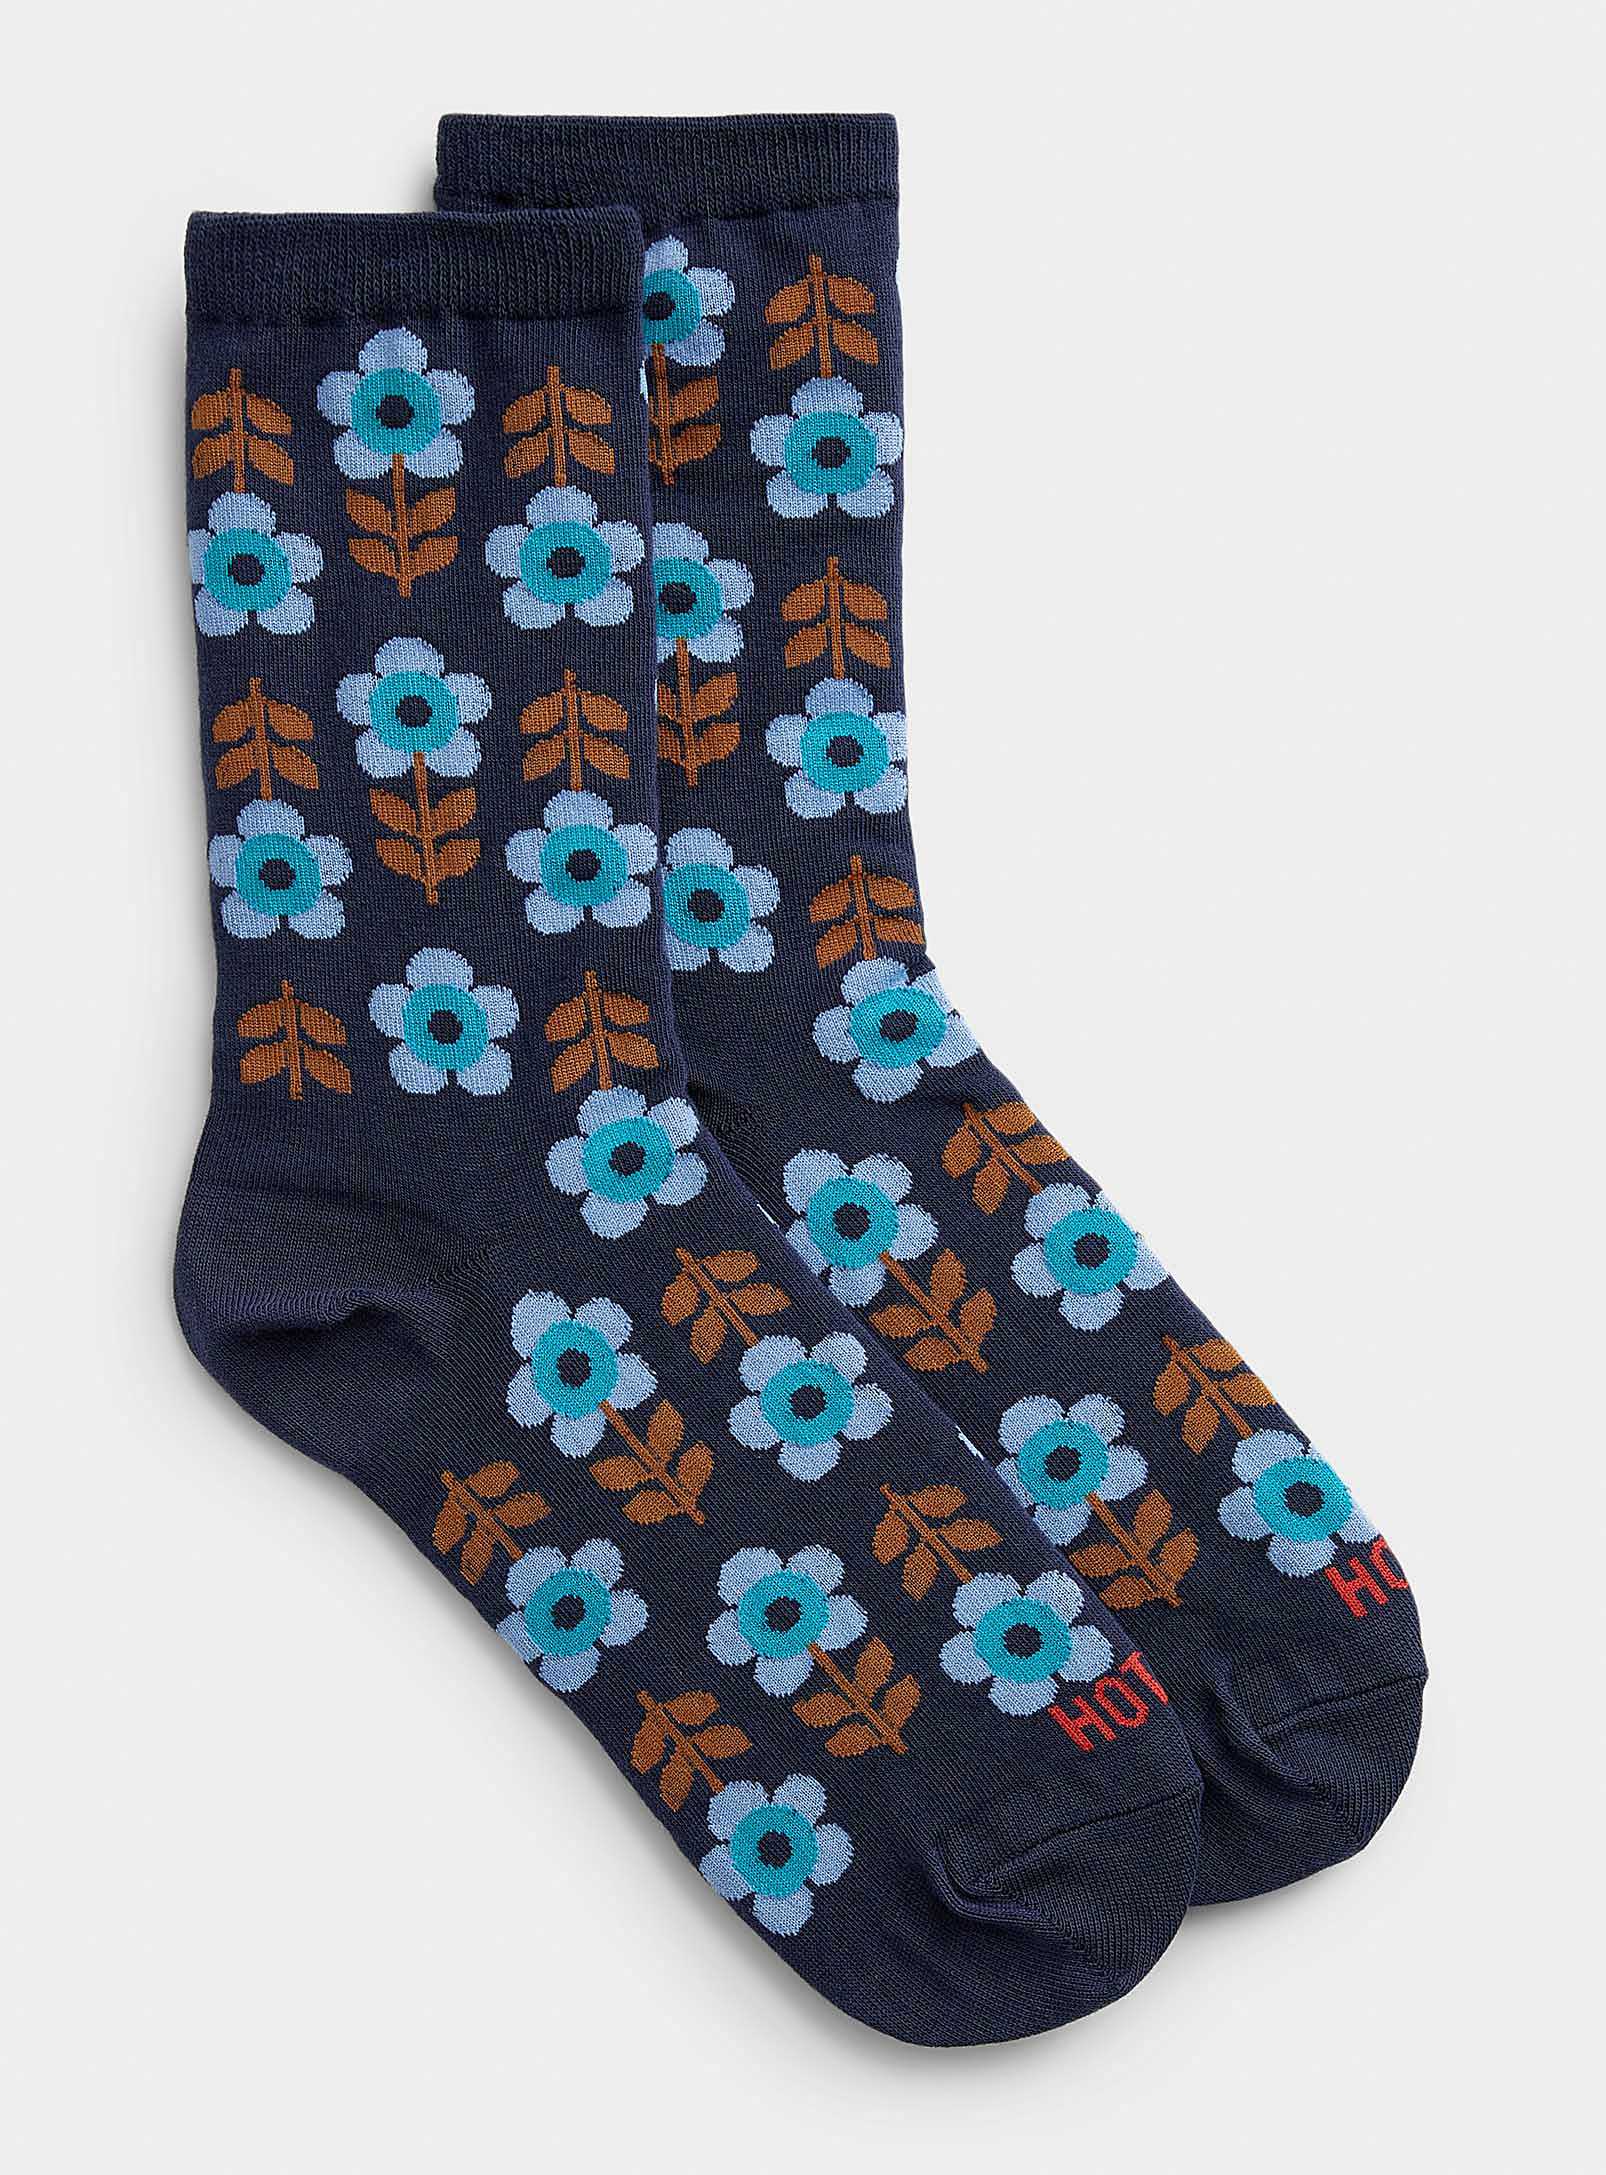 Hot Sox - Women's Colourful floral sock